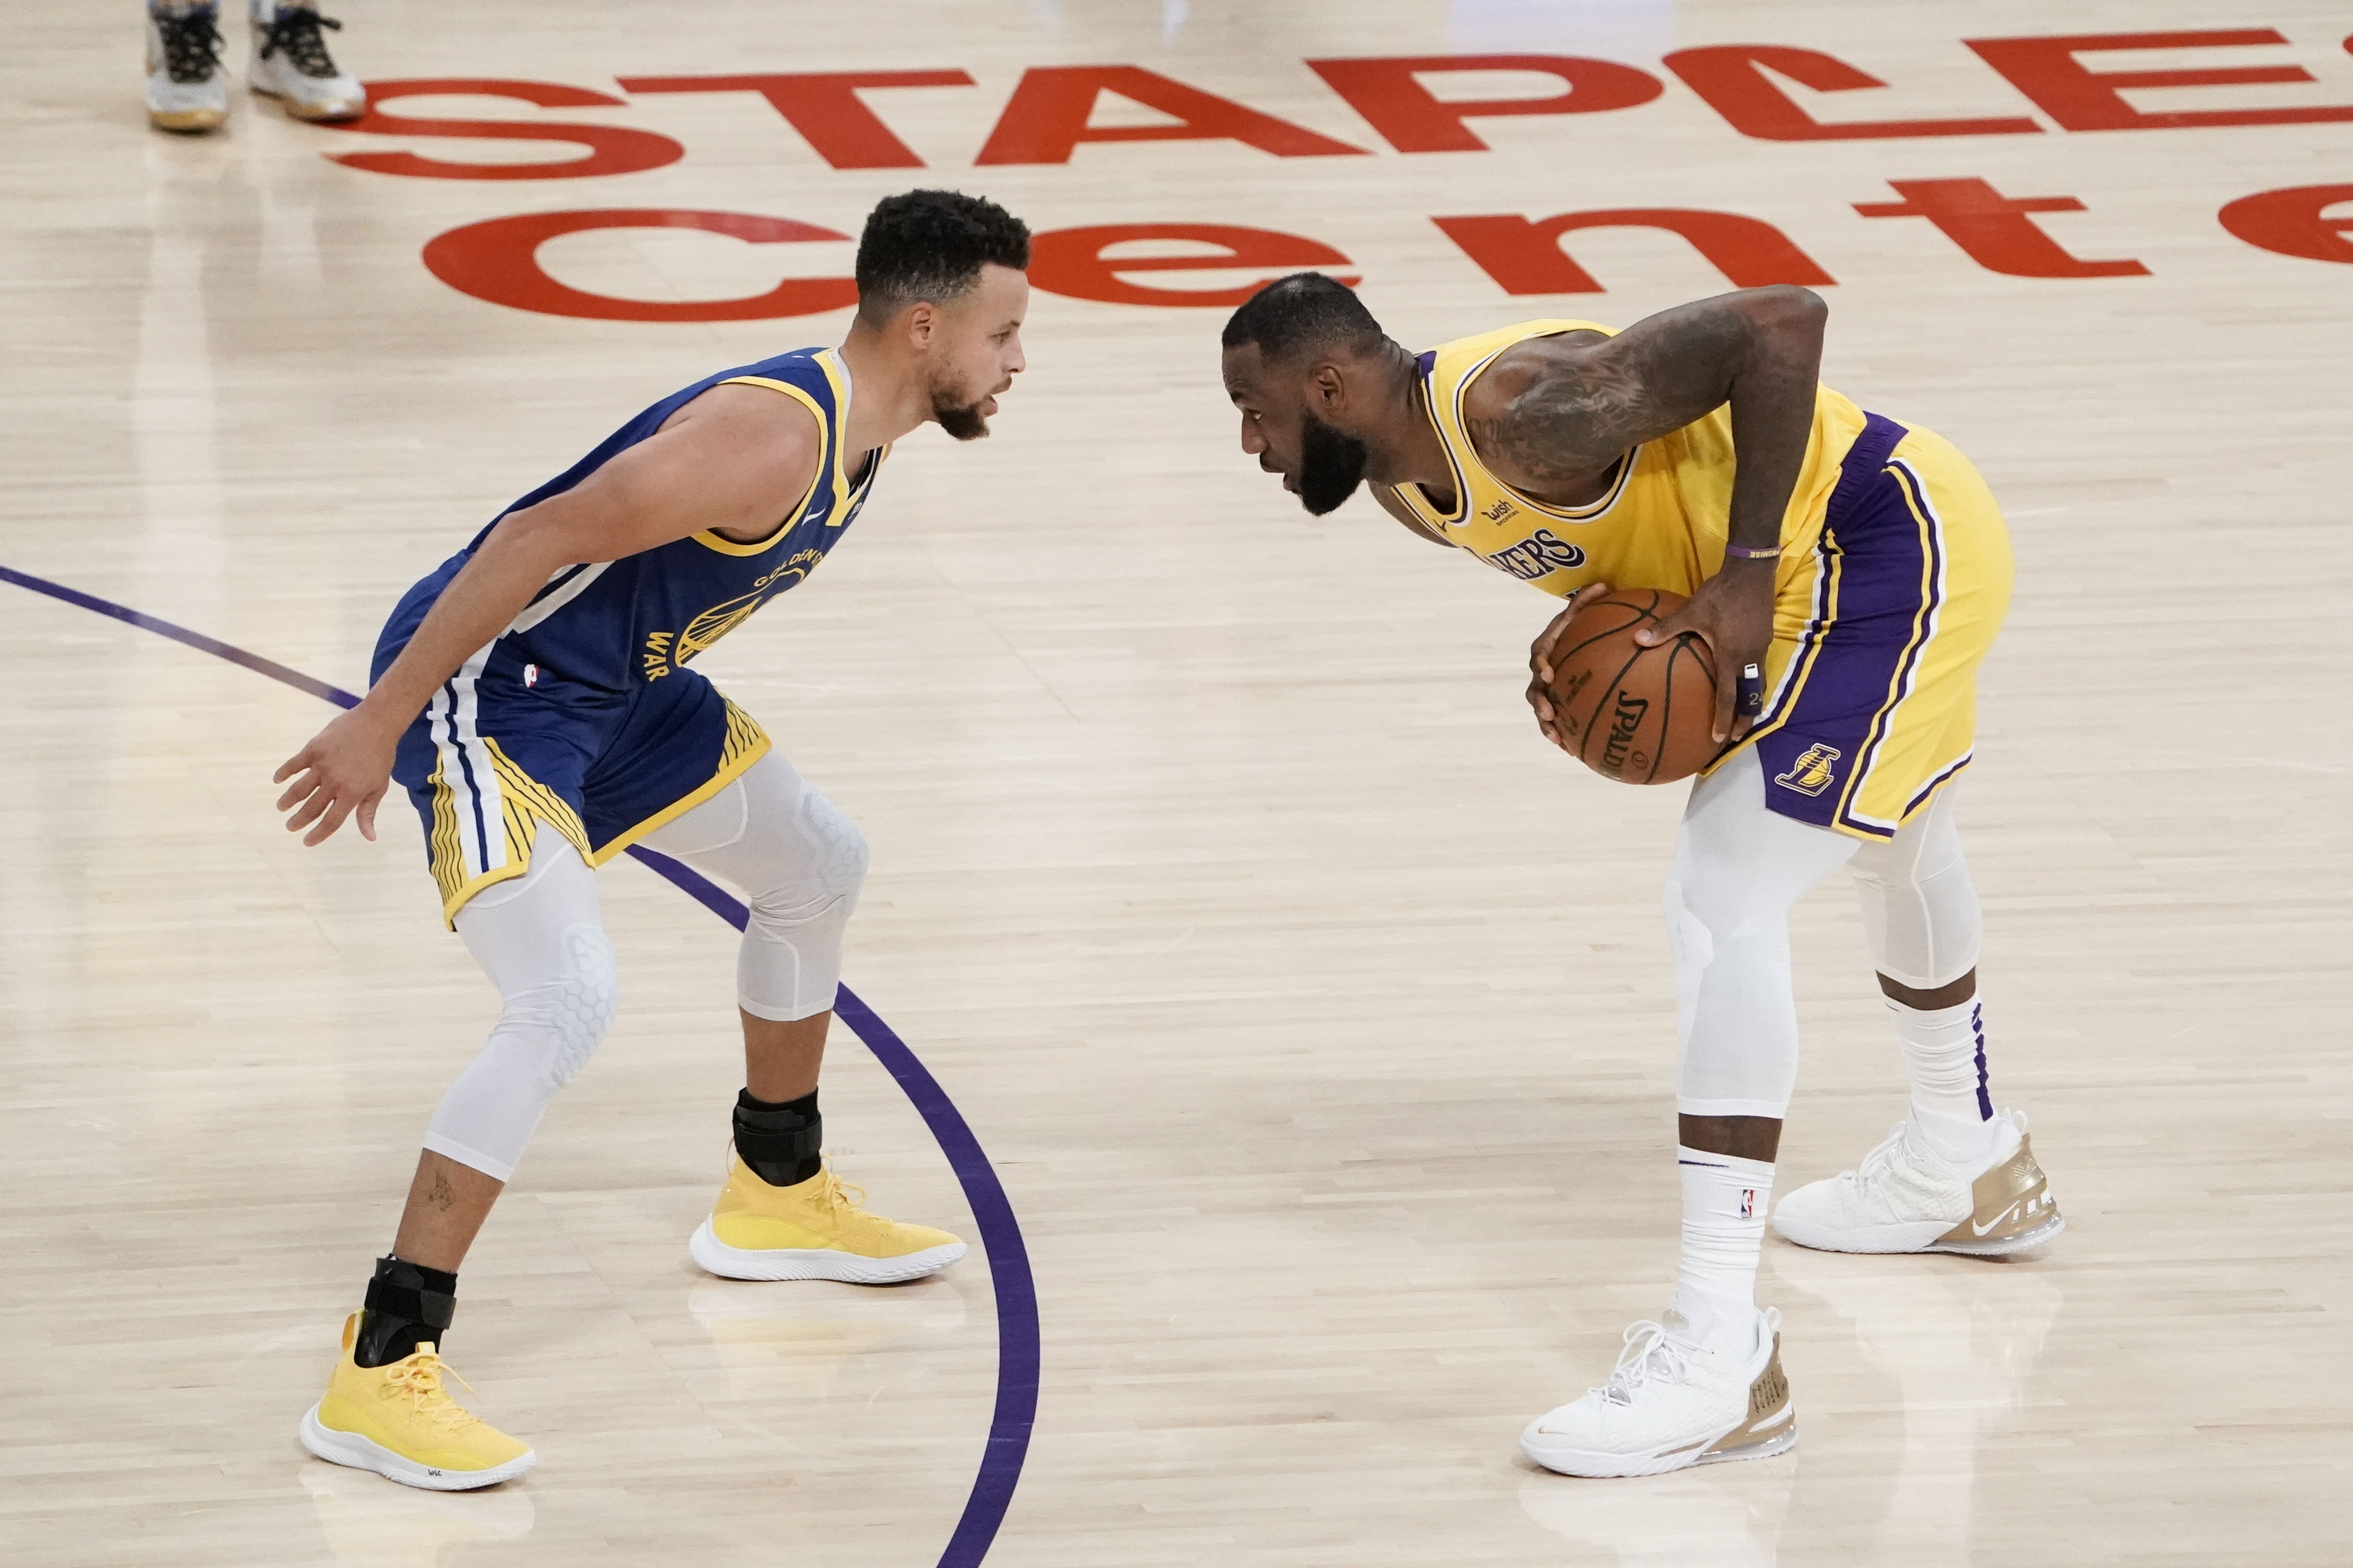 Curry, Lakers lead NBA Store best-sellers in Philippines